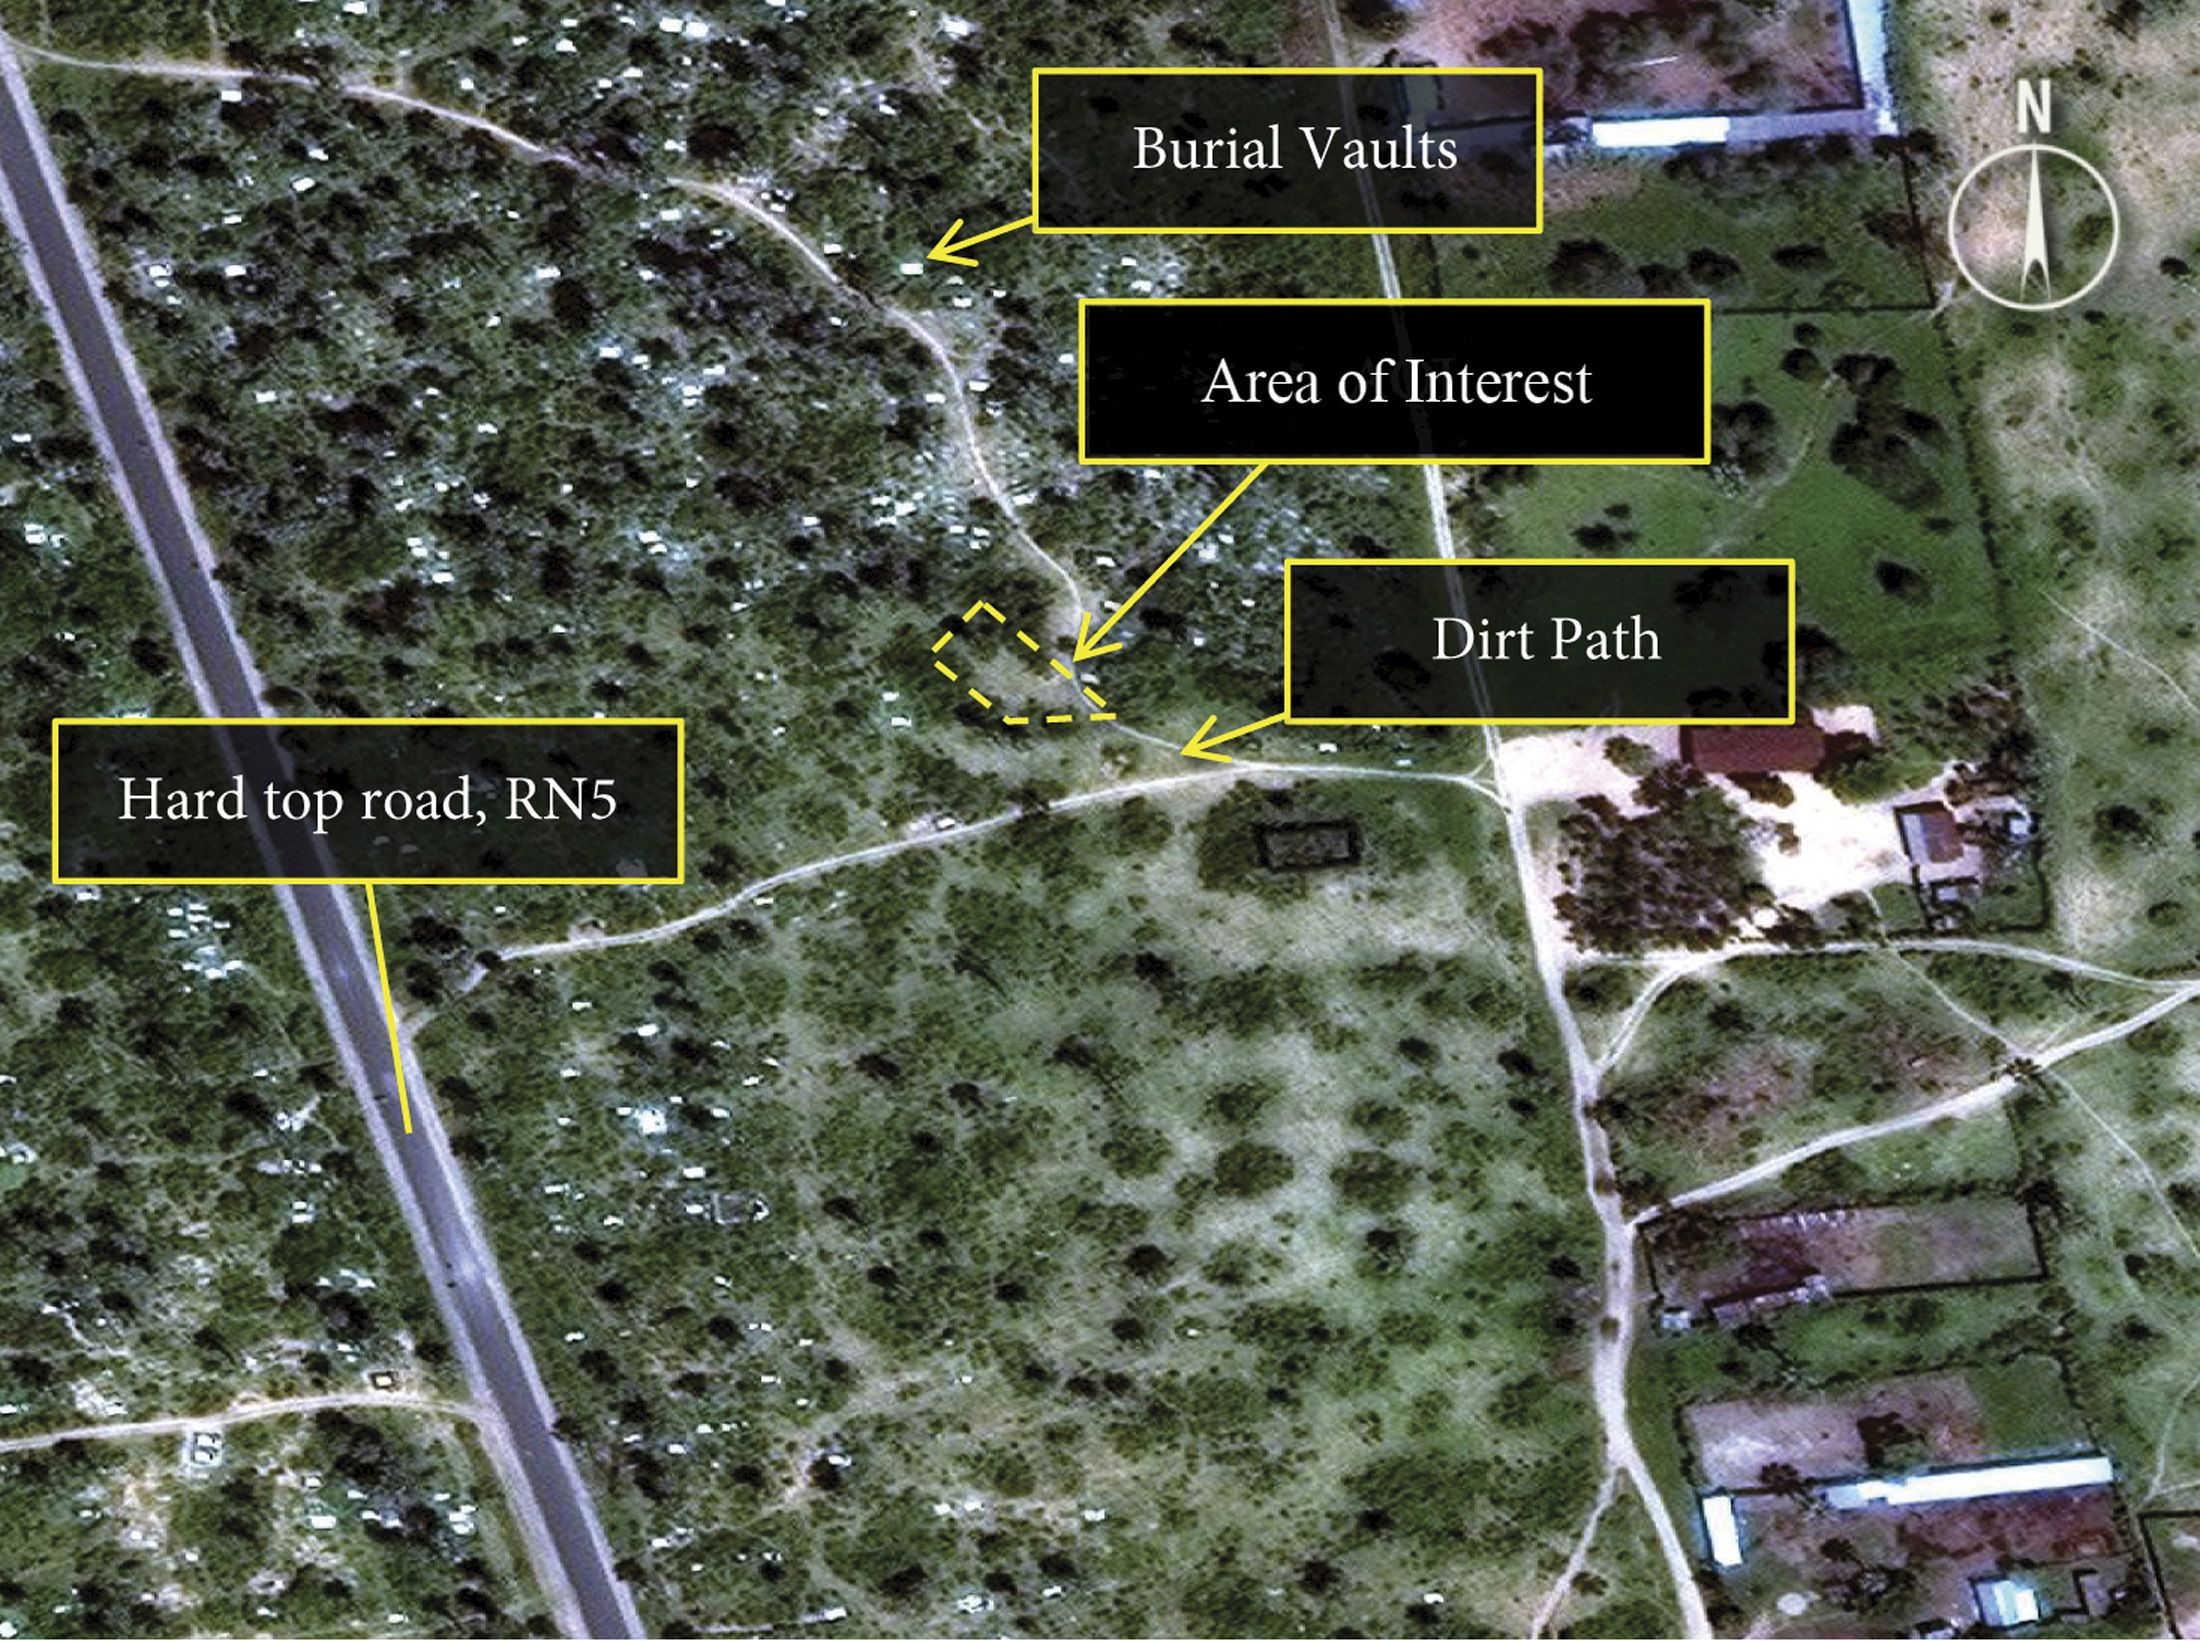 A satellite image released by Amnesty International shows a possible mass grave site in Burundi.